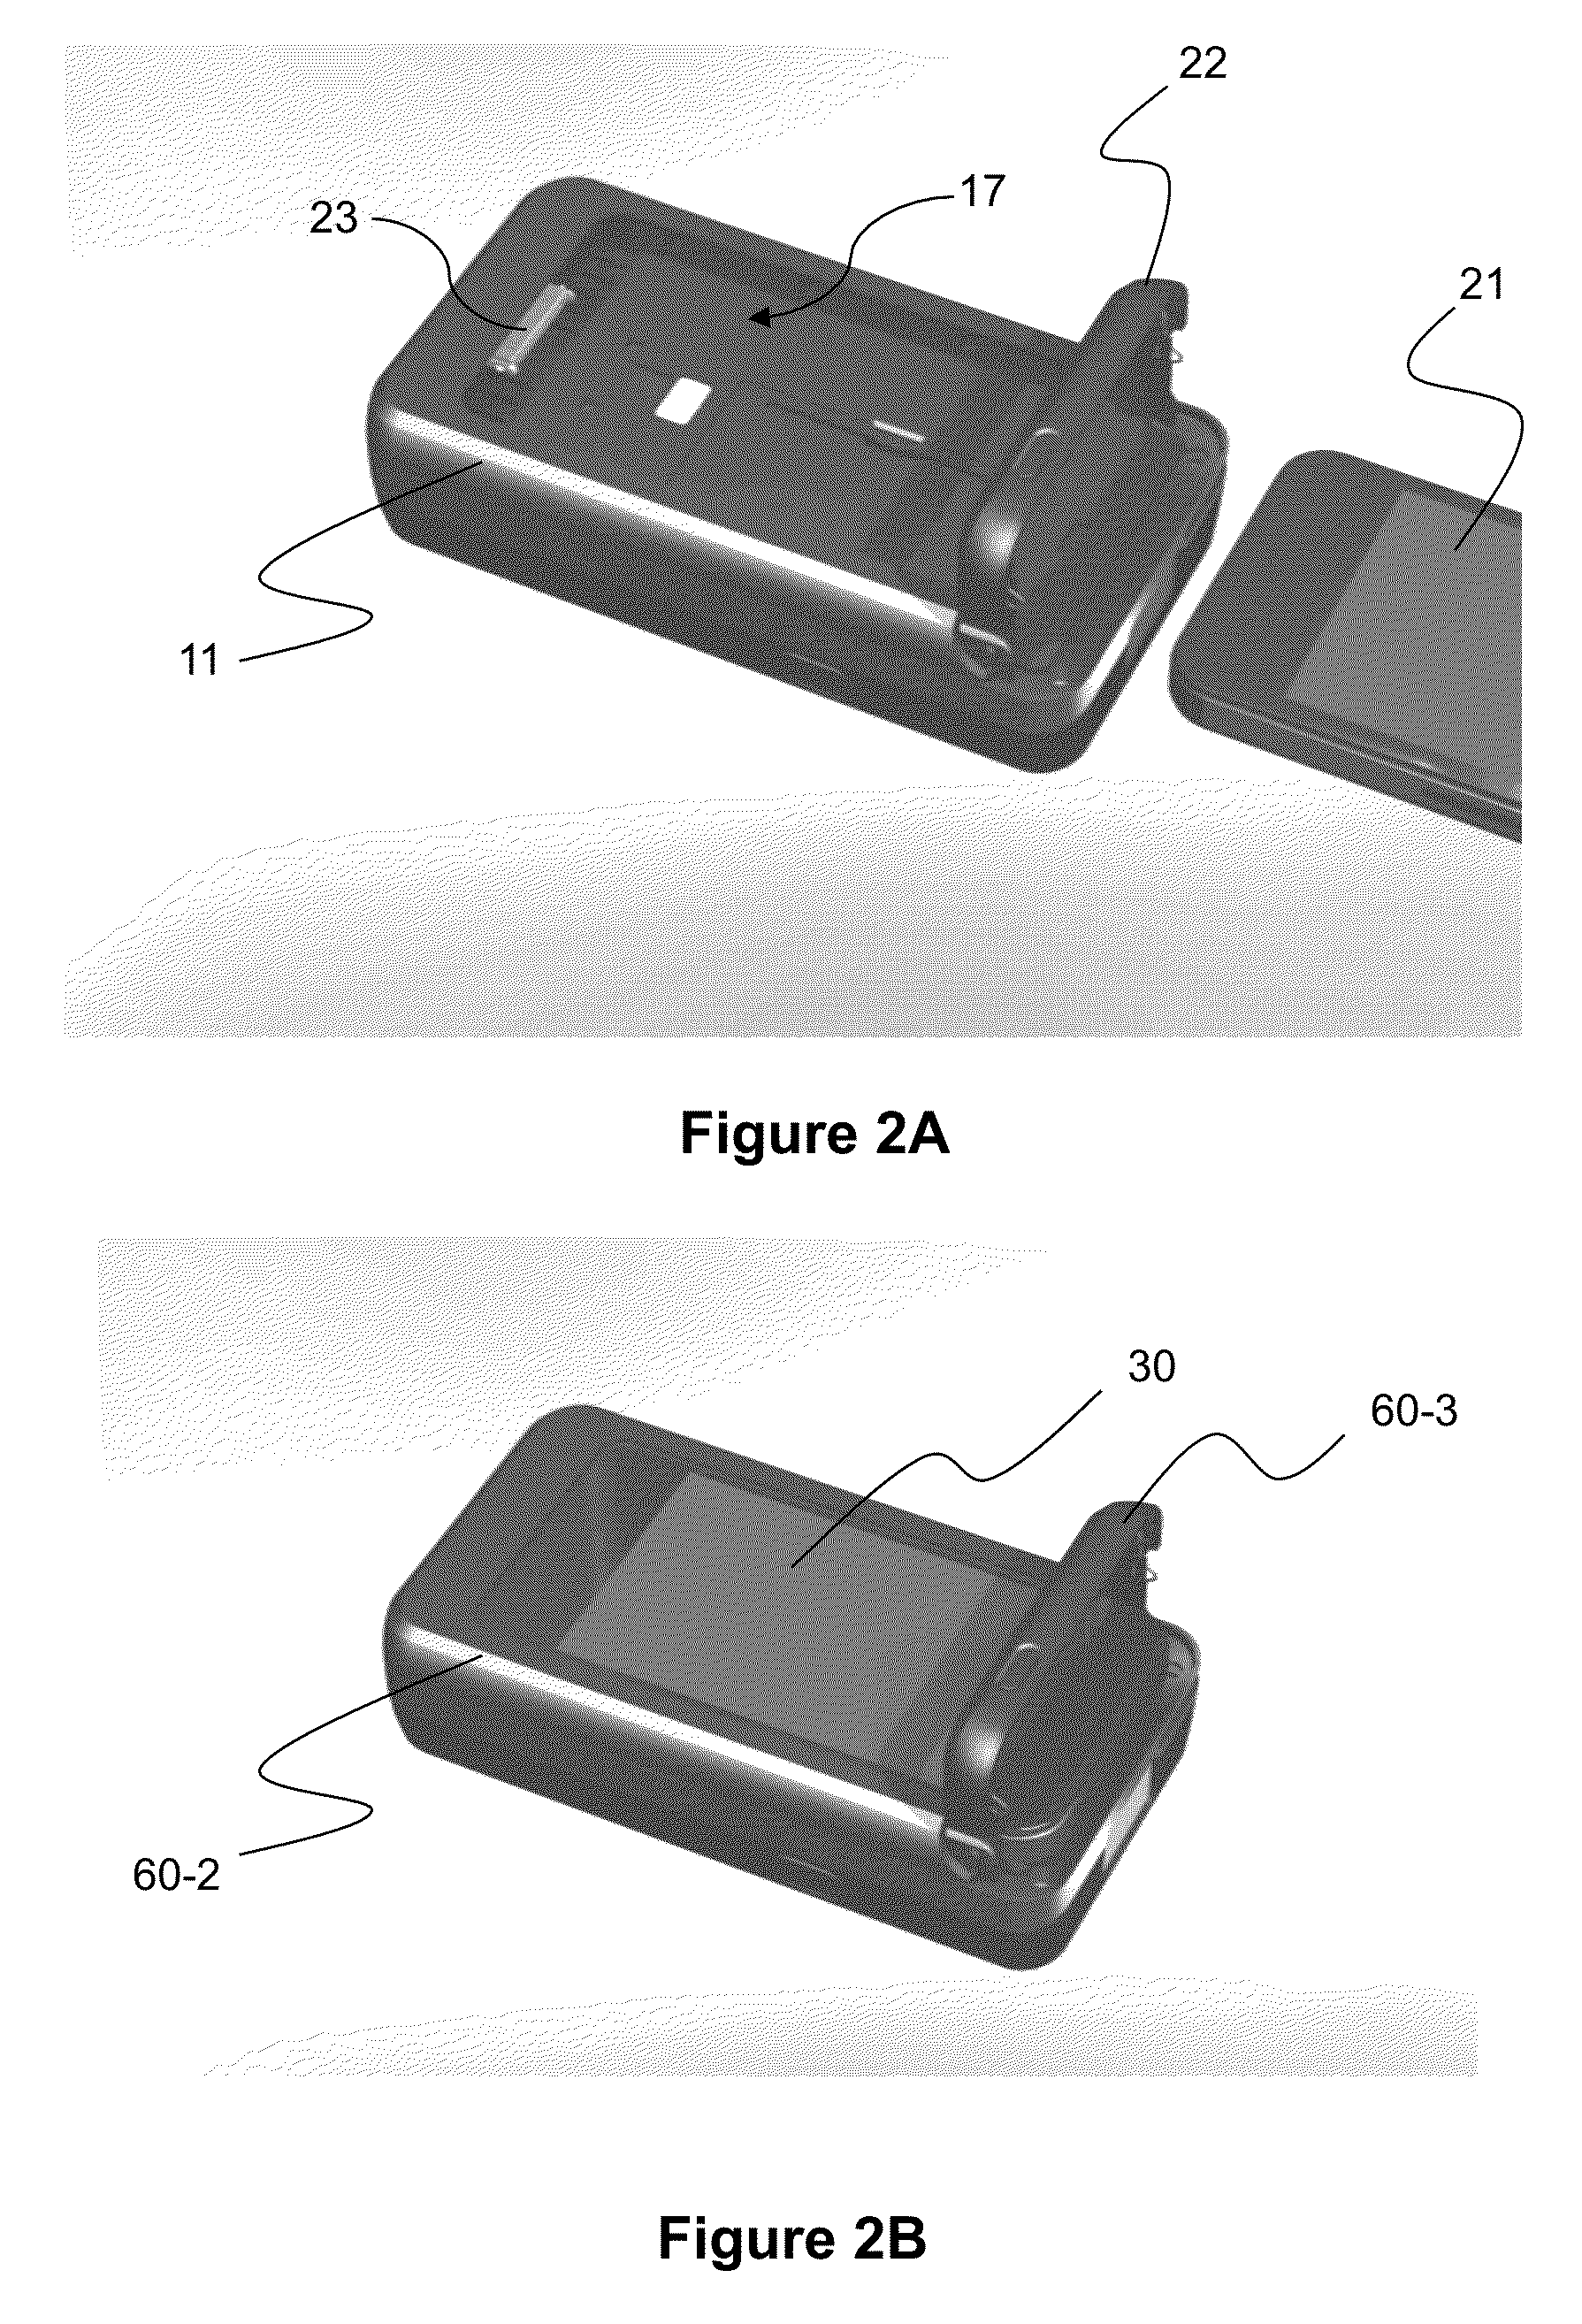 Electronic payment device able to receive and hold a portable telephone